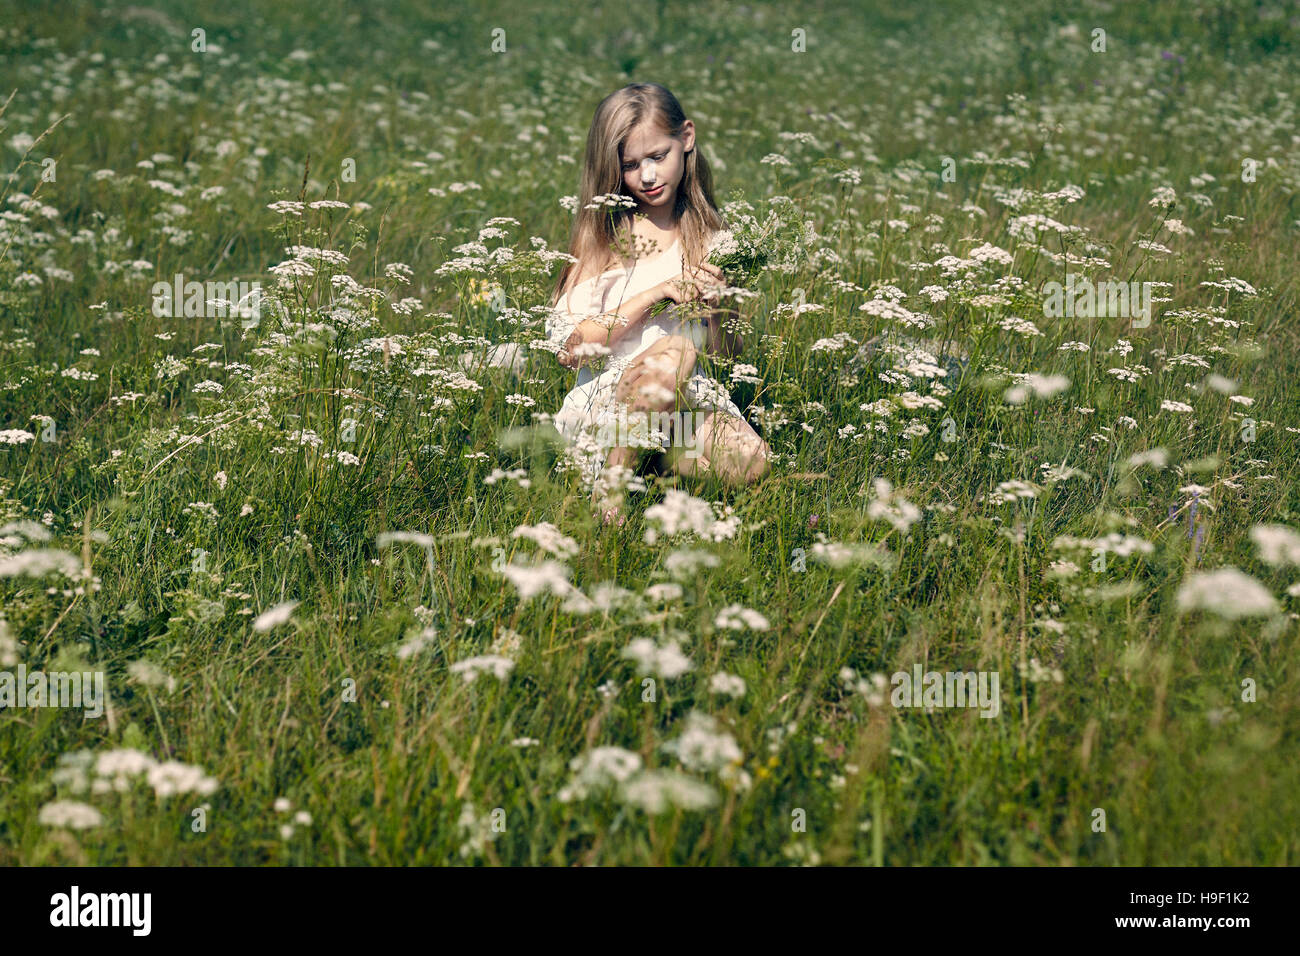 Woman crouching dans la zone picking wildflowers Banque D'Images